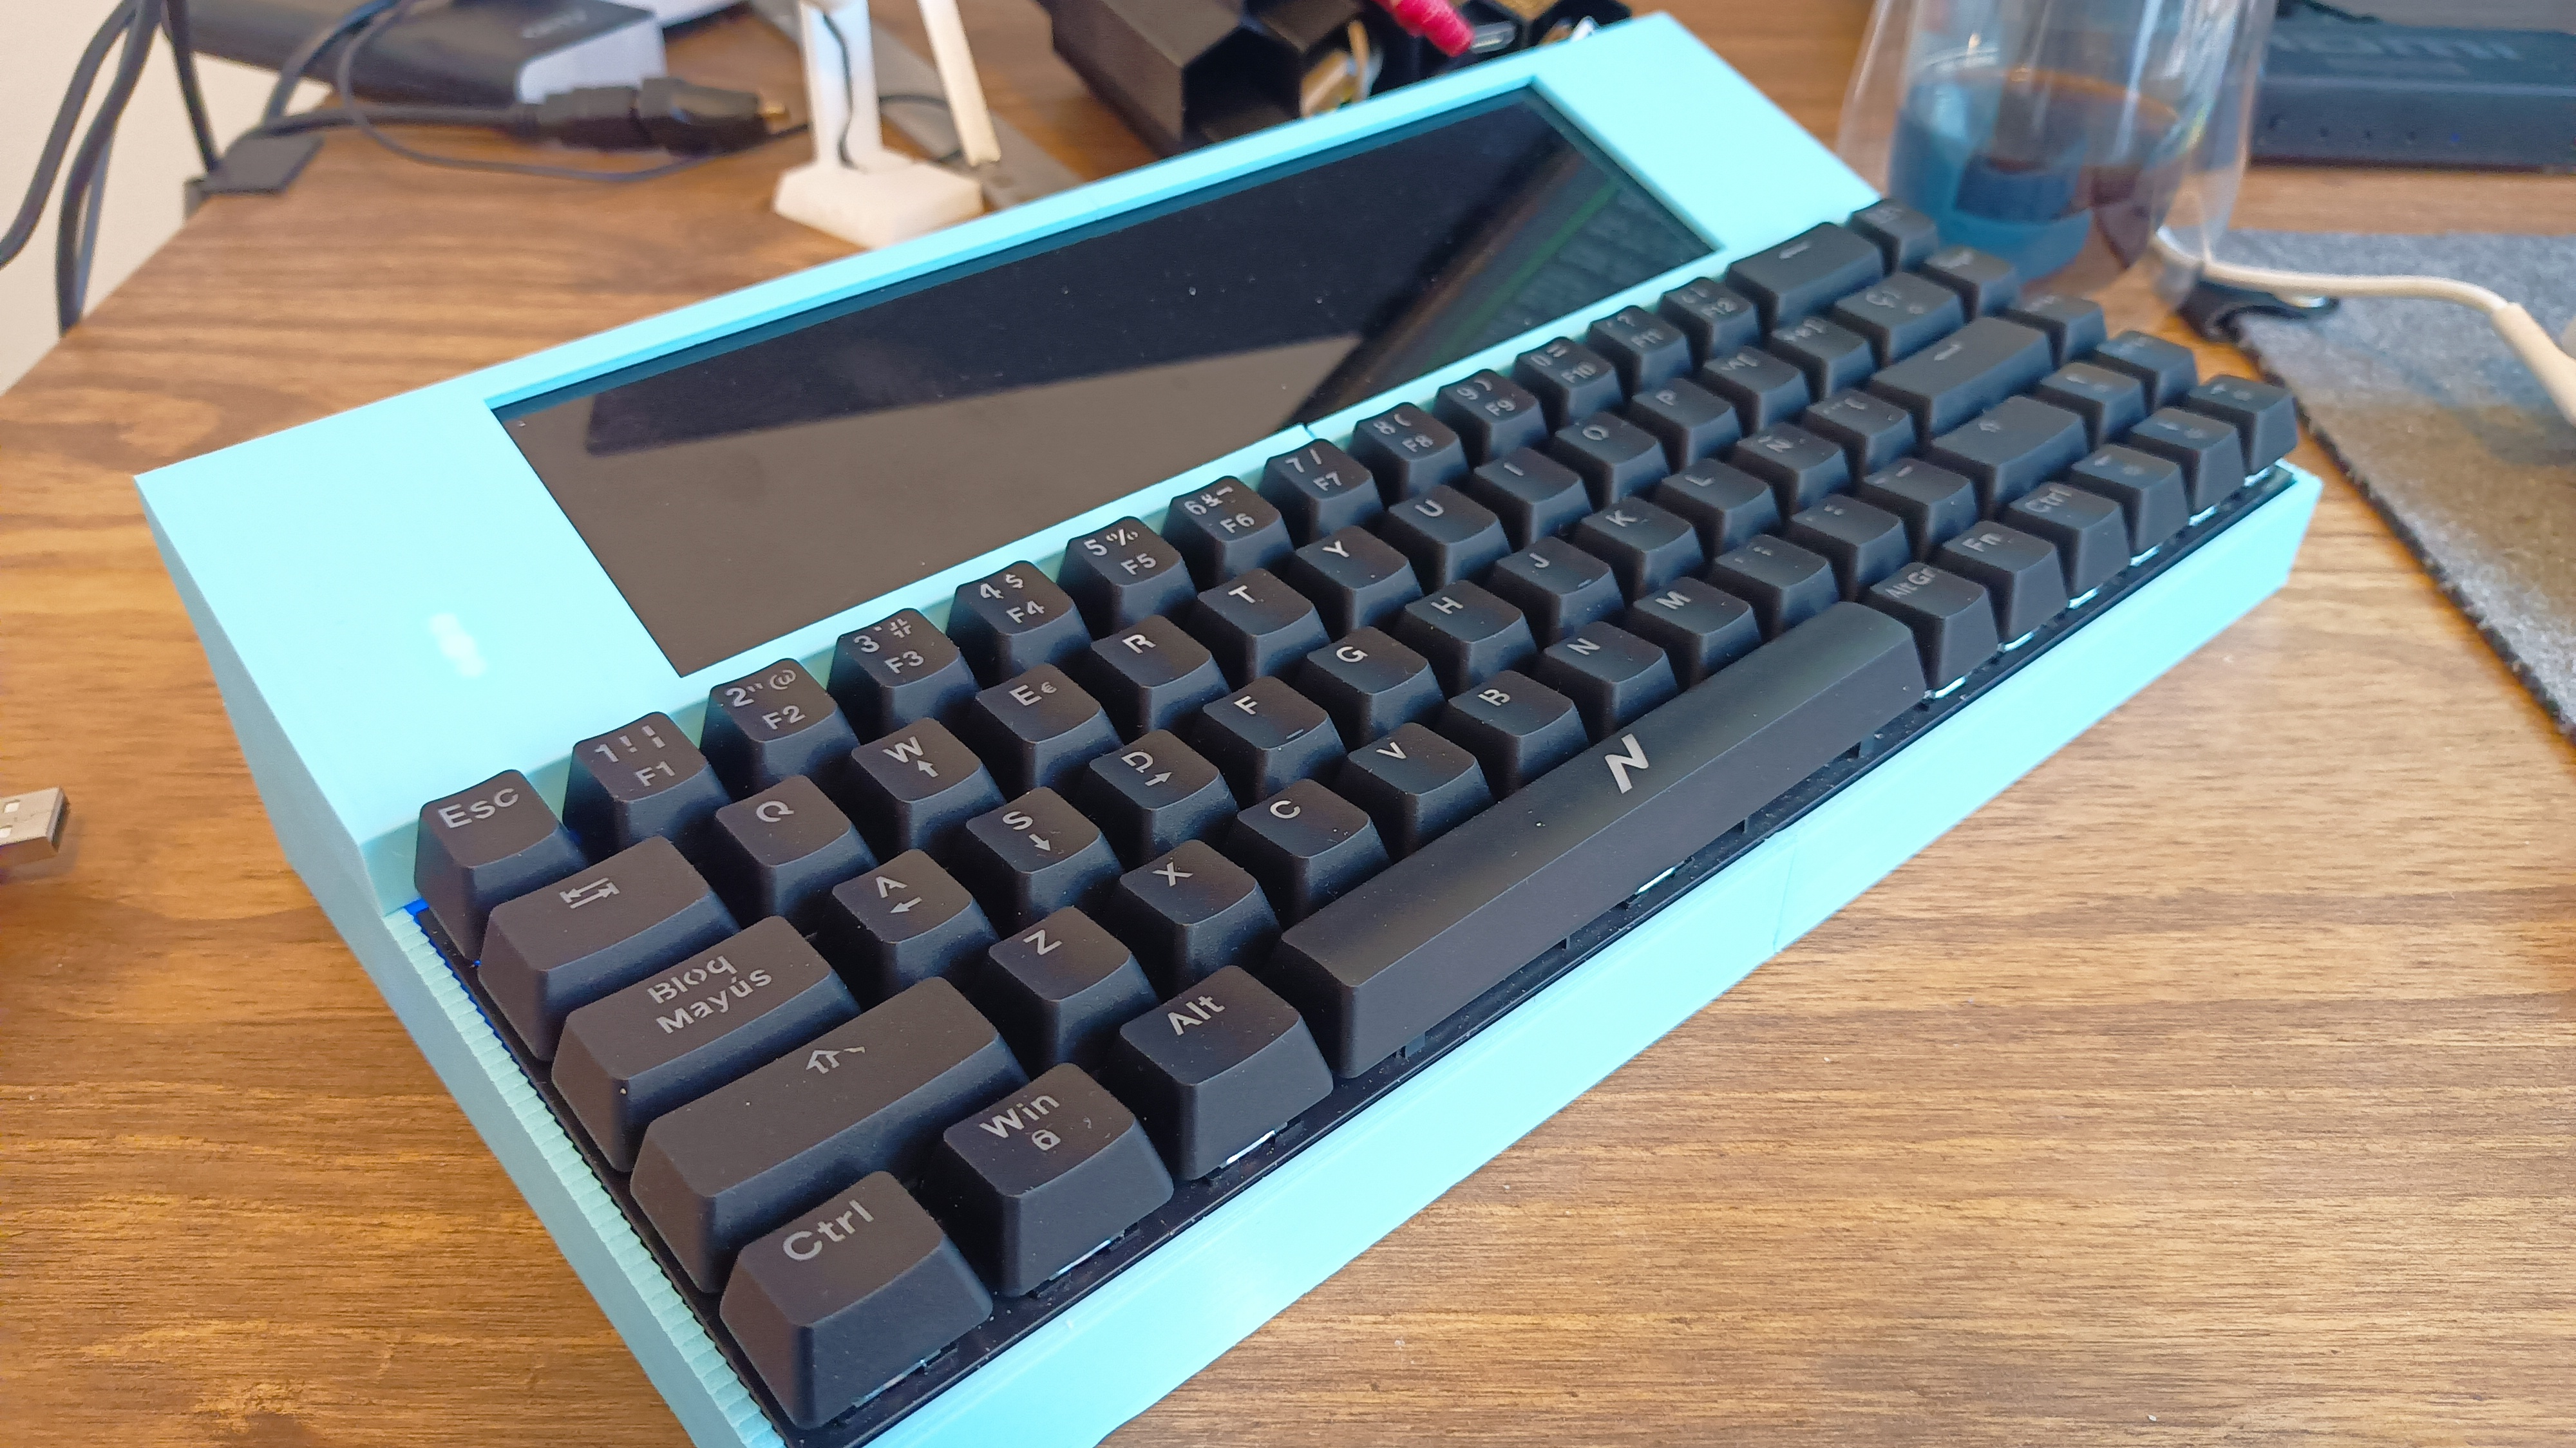 TRS-80 Model 100 Inspires Cool Cyberdeck Build, 40 Years Down The Line